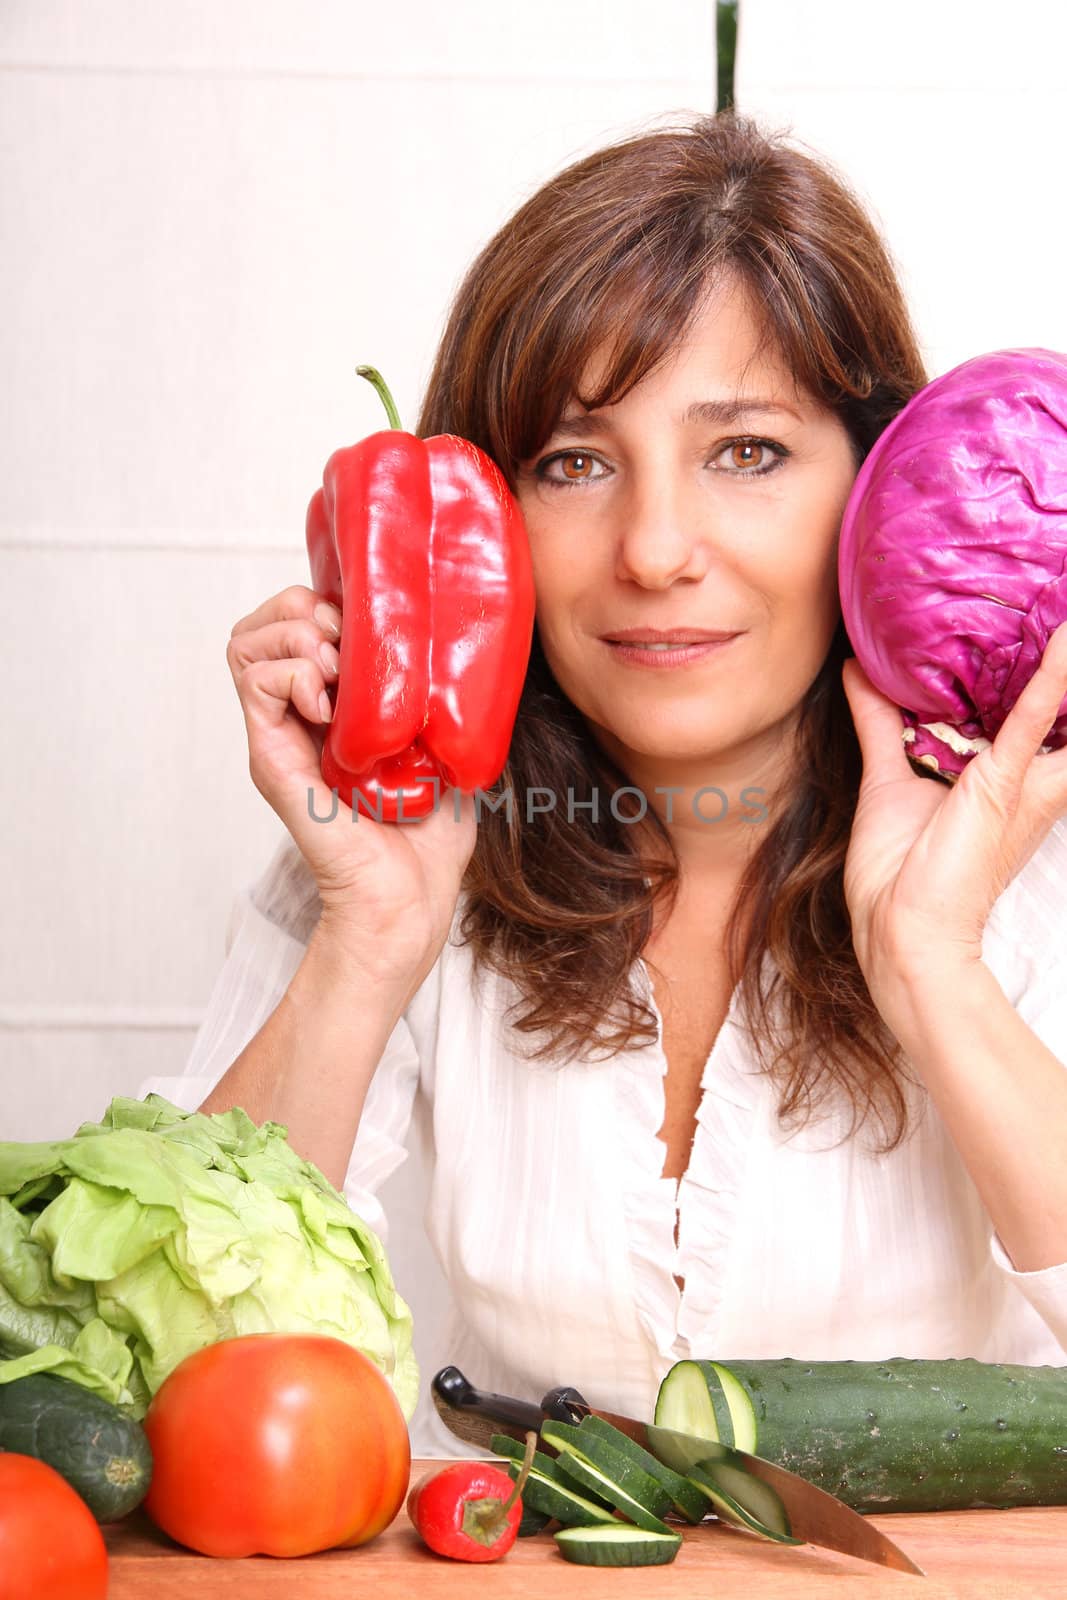 Woman with Vegetables	 by Spectral